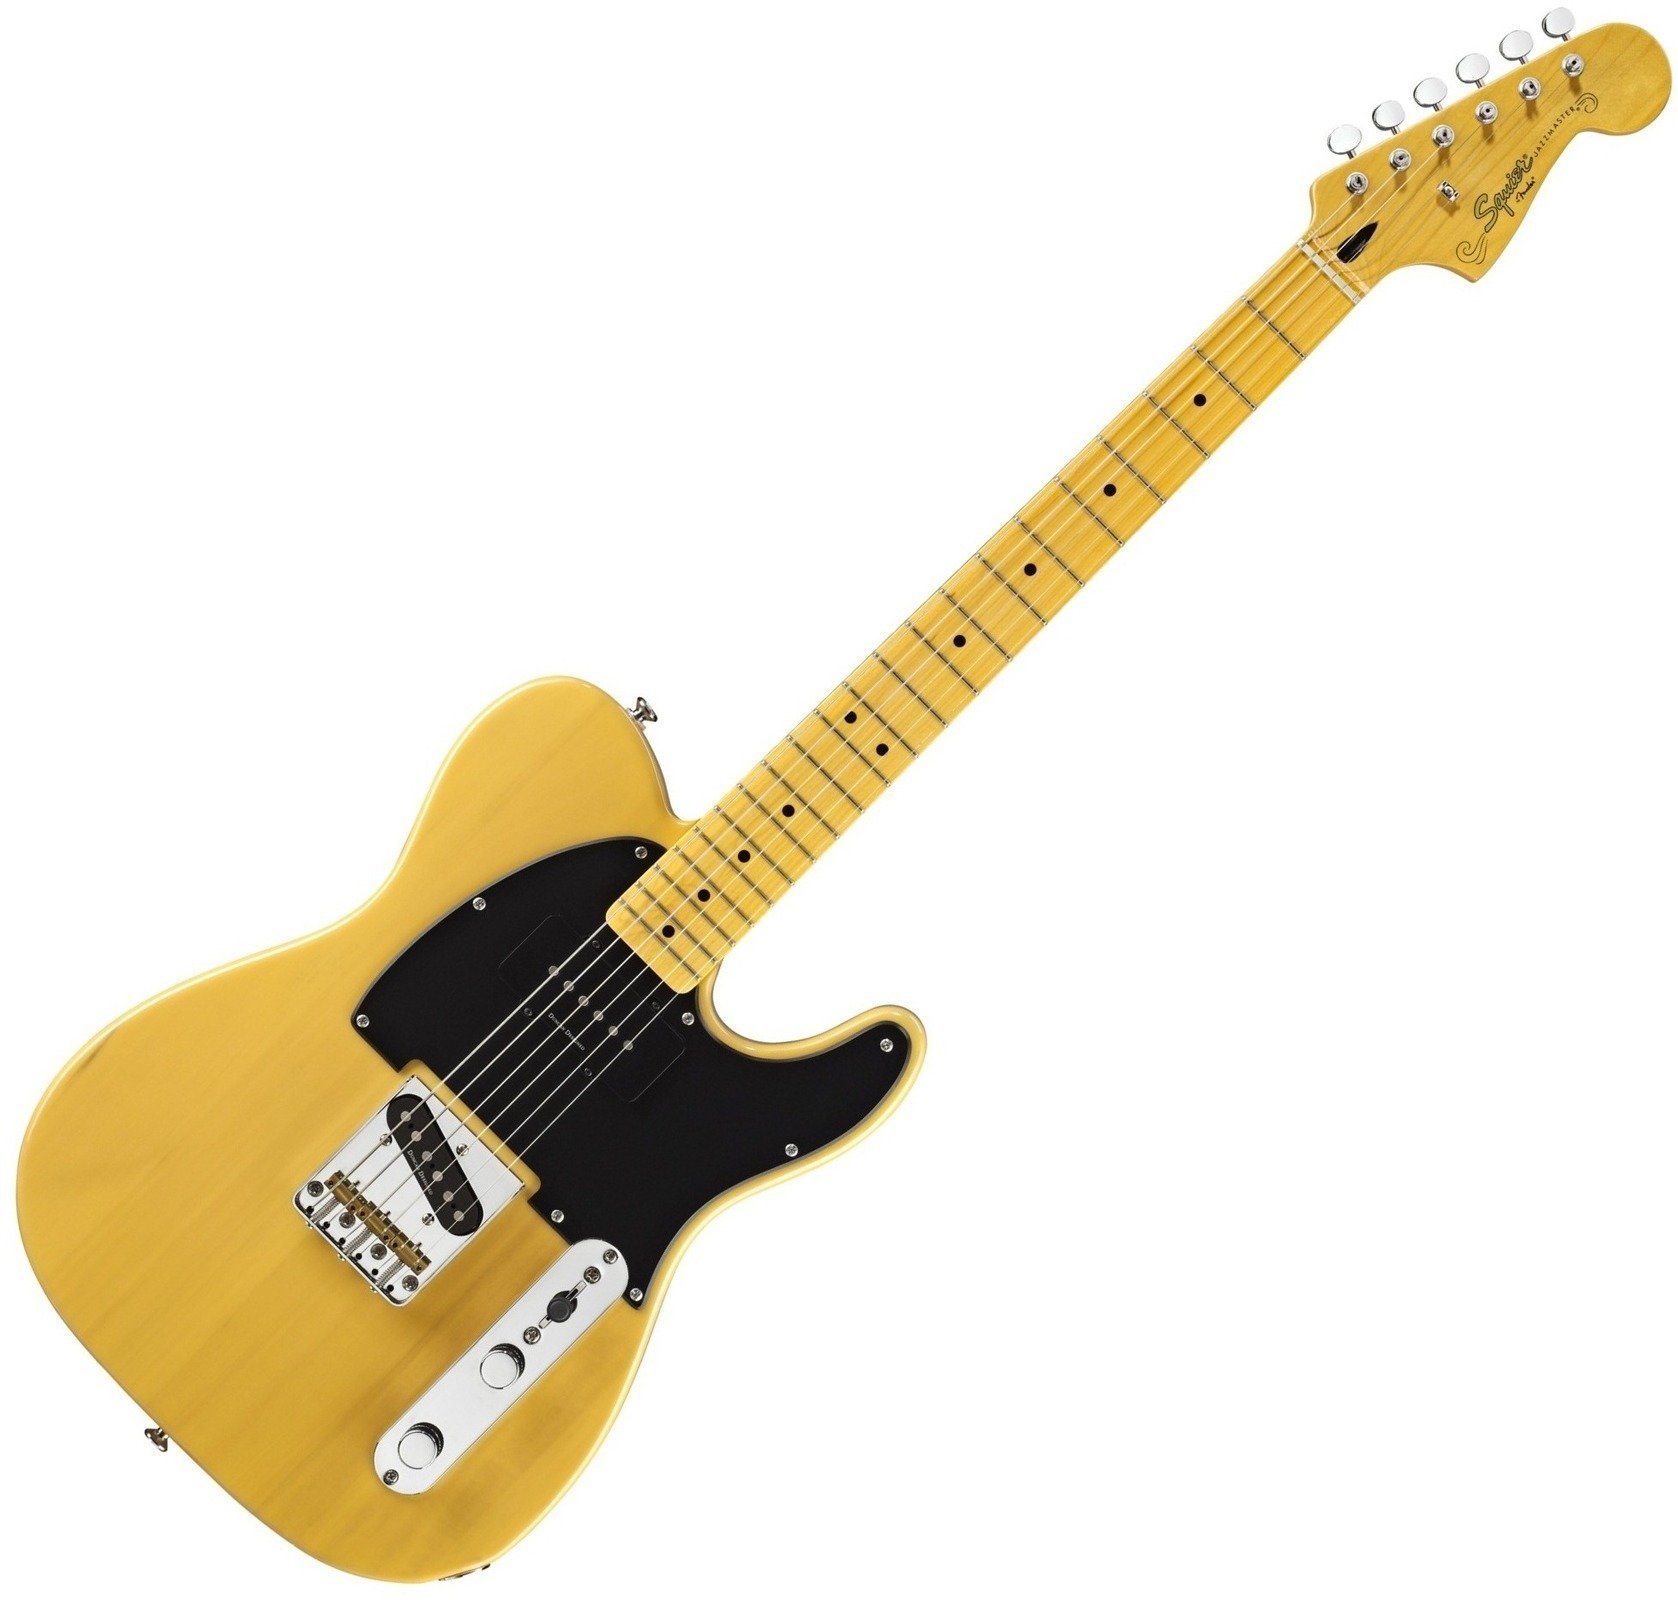 Guitarra electrica Fender Squier Vintage Modified Telecaster Special White Blonde